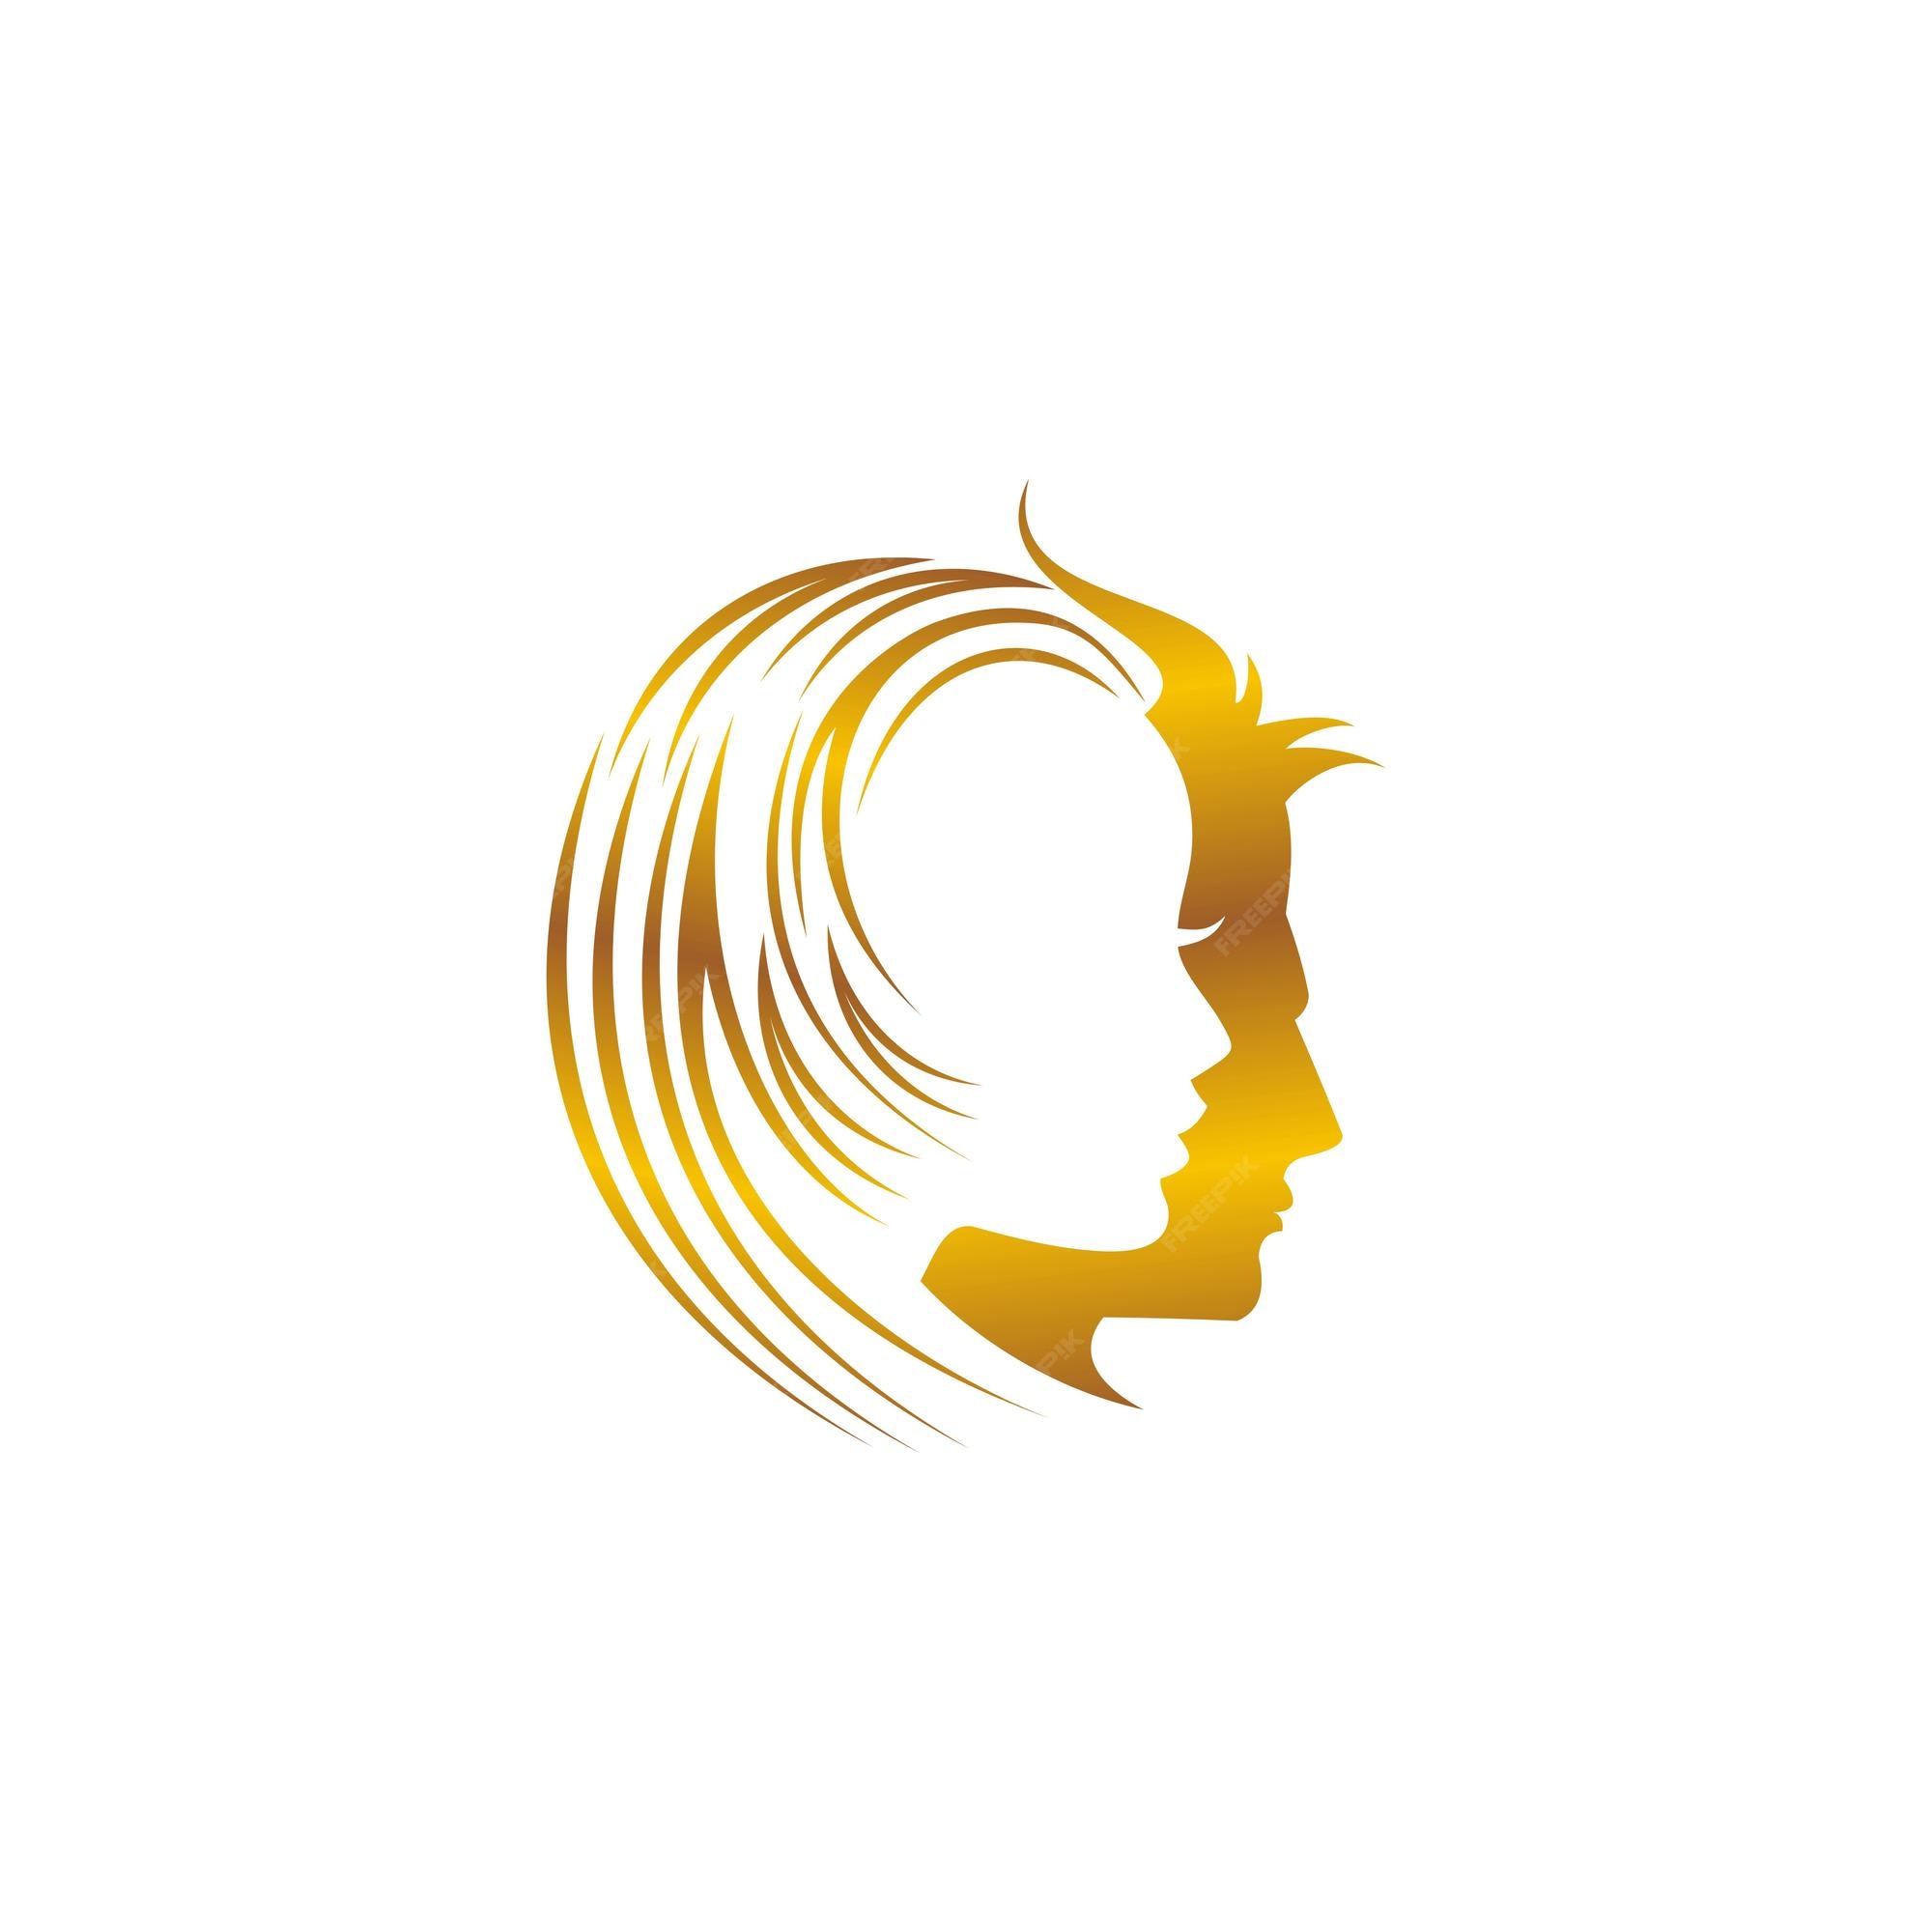 Premium Vector | Vector illustration of woman hair style icon, logo woman  on white background